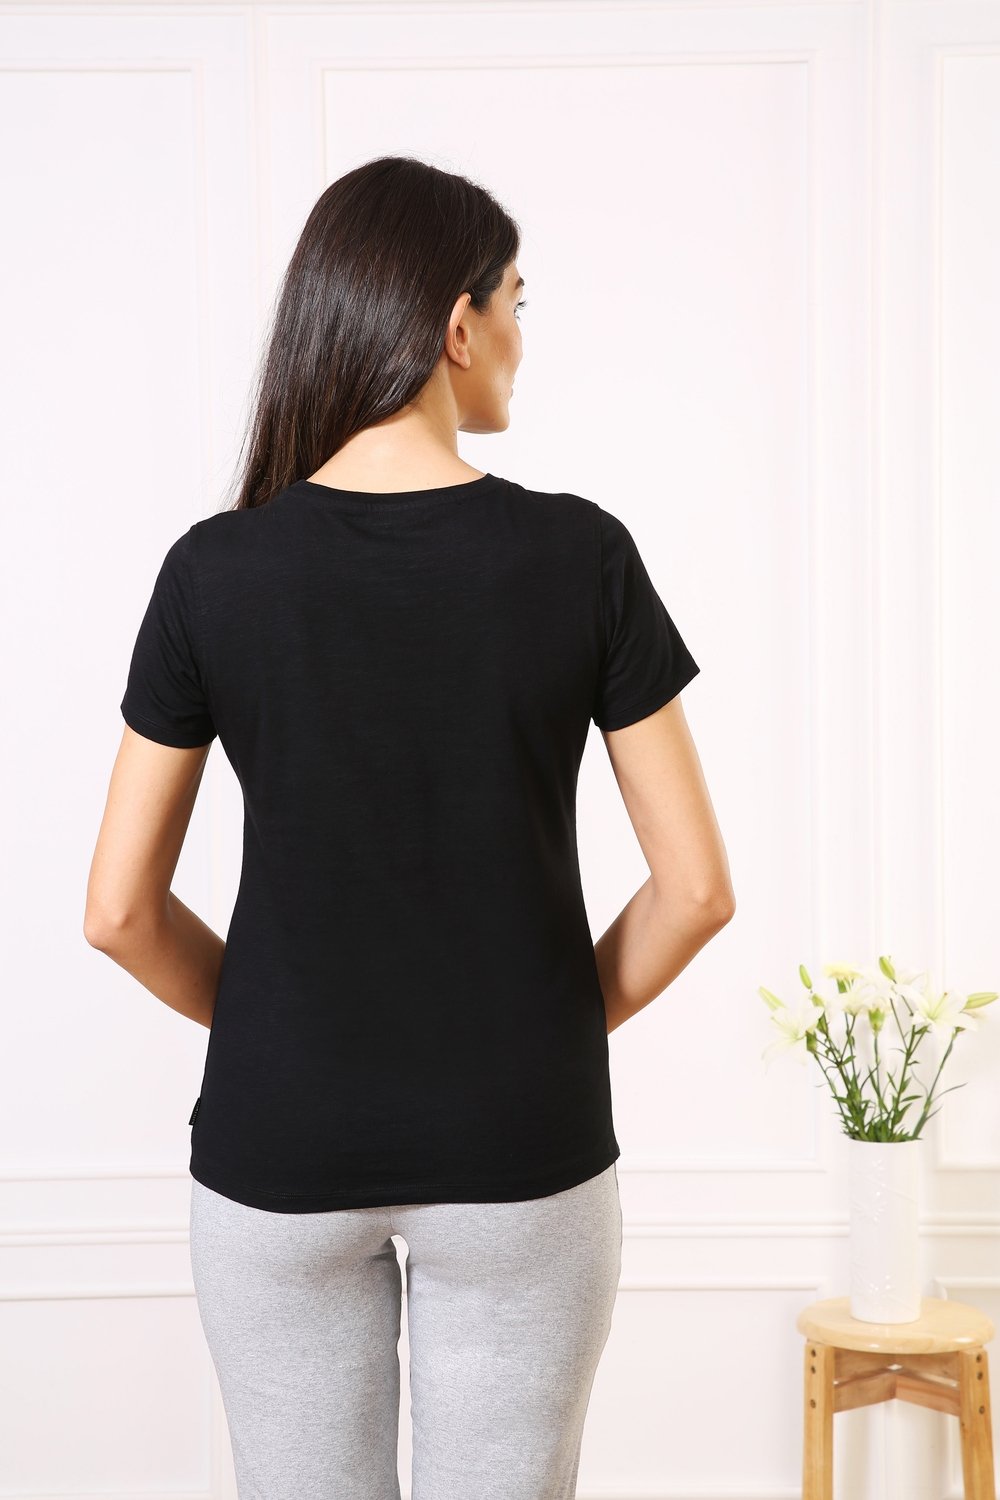 Black Classic Cotton Every day Wear t-shirt tops for Women - Stilento